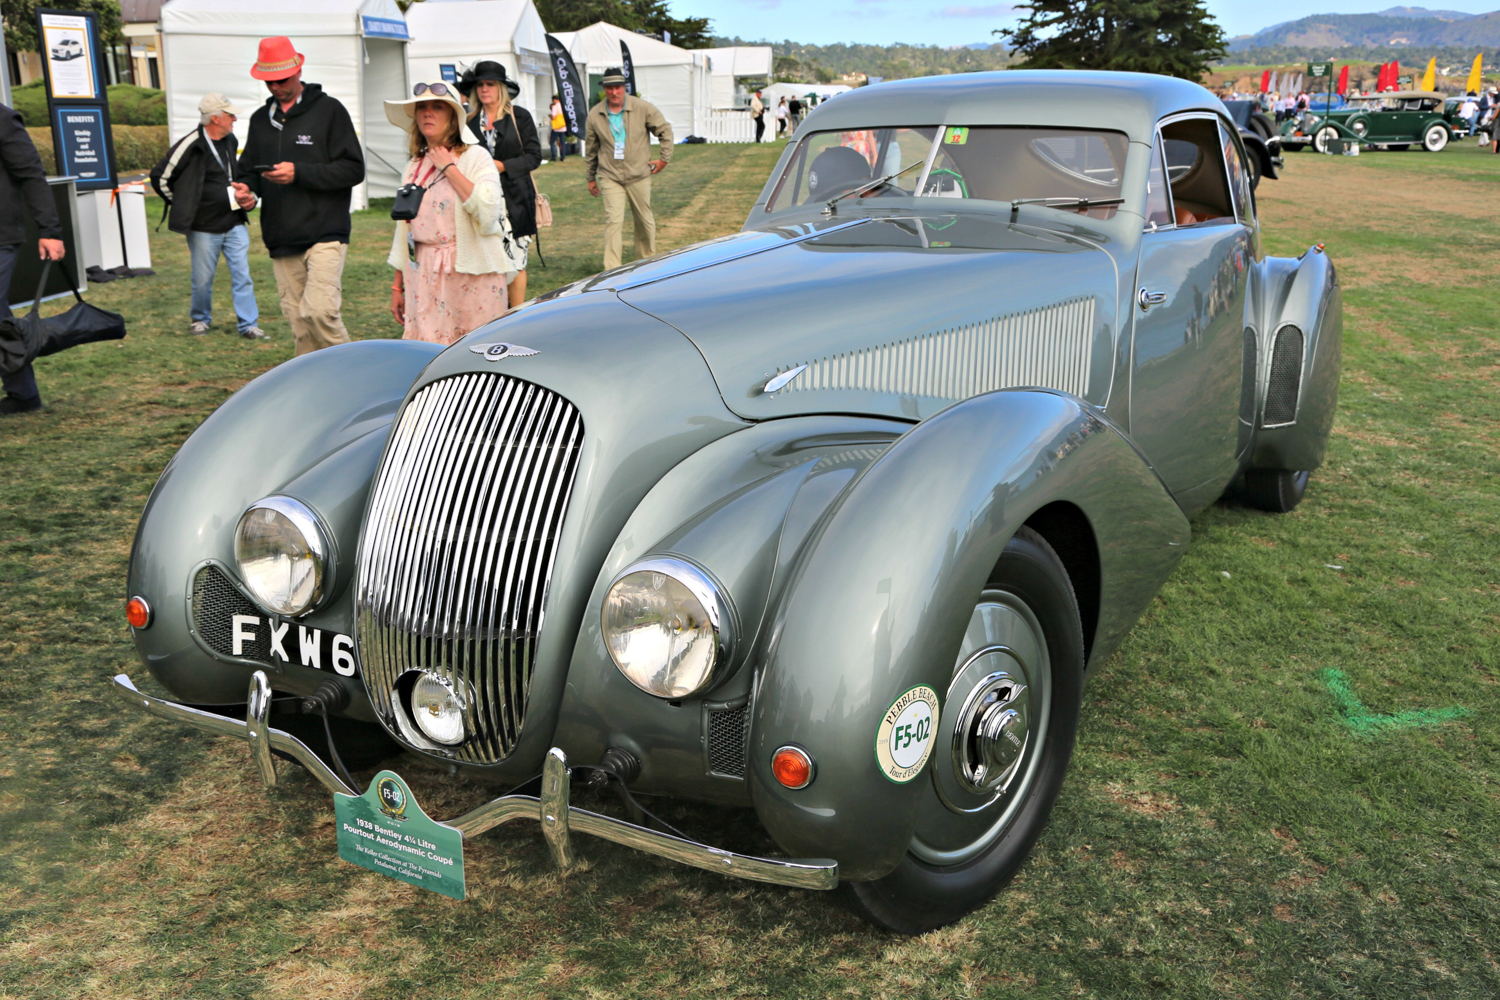 1938 Bentley 4 1/4 Litre Pourtout Aerodynamic Coupe. The Keller Collection at The Pyramids